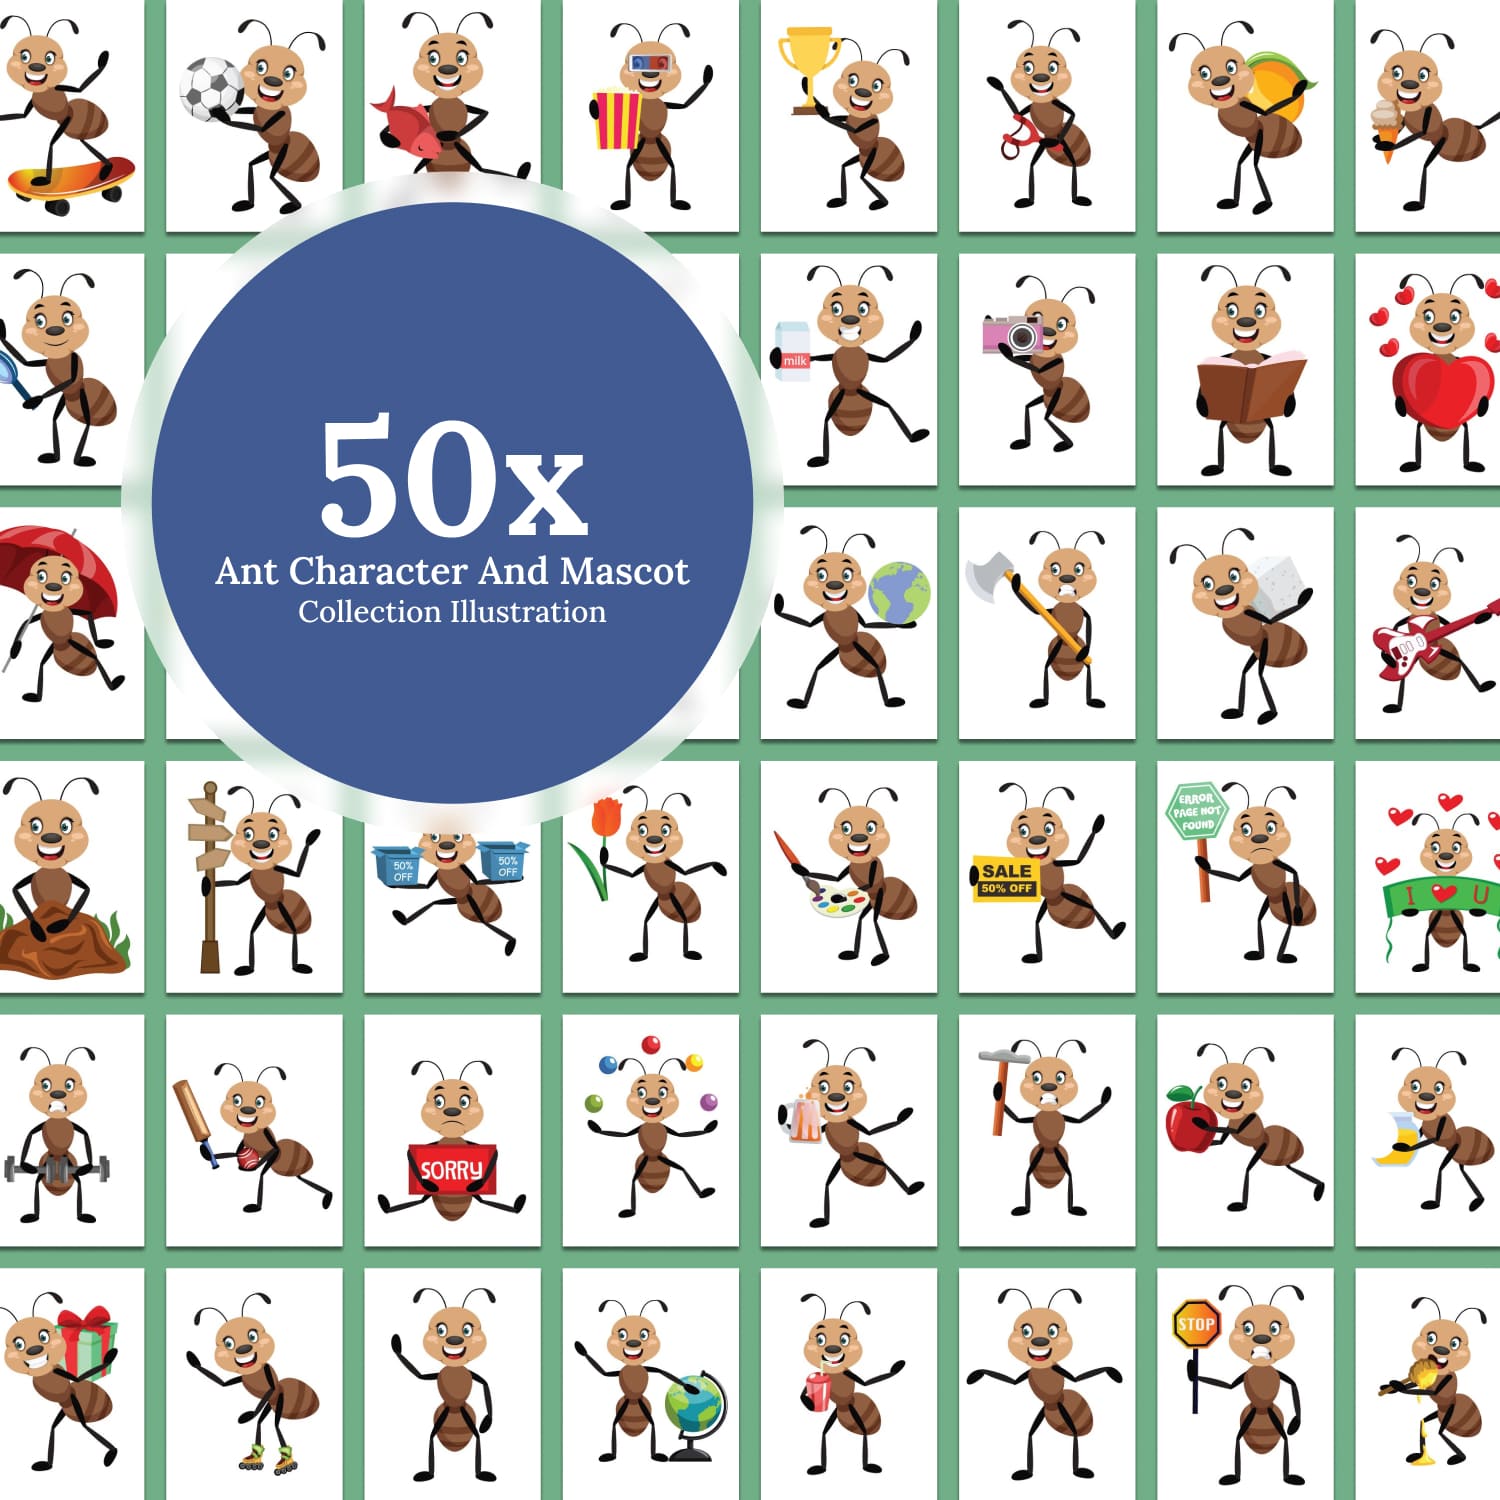 50x Ant Character and Mascot Collection illustration.